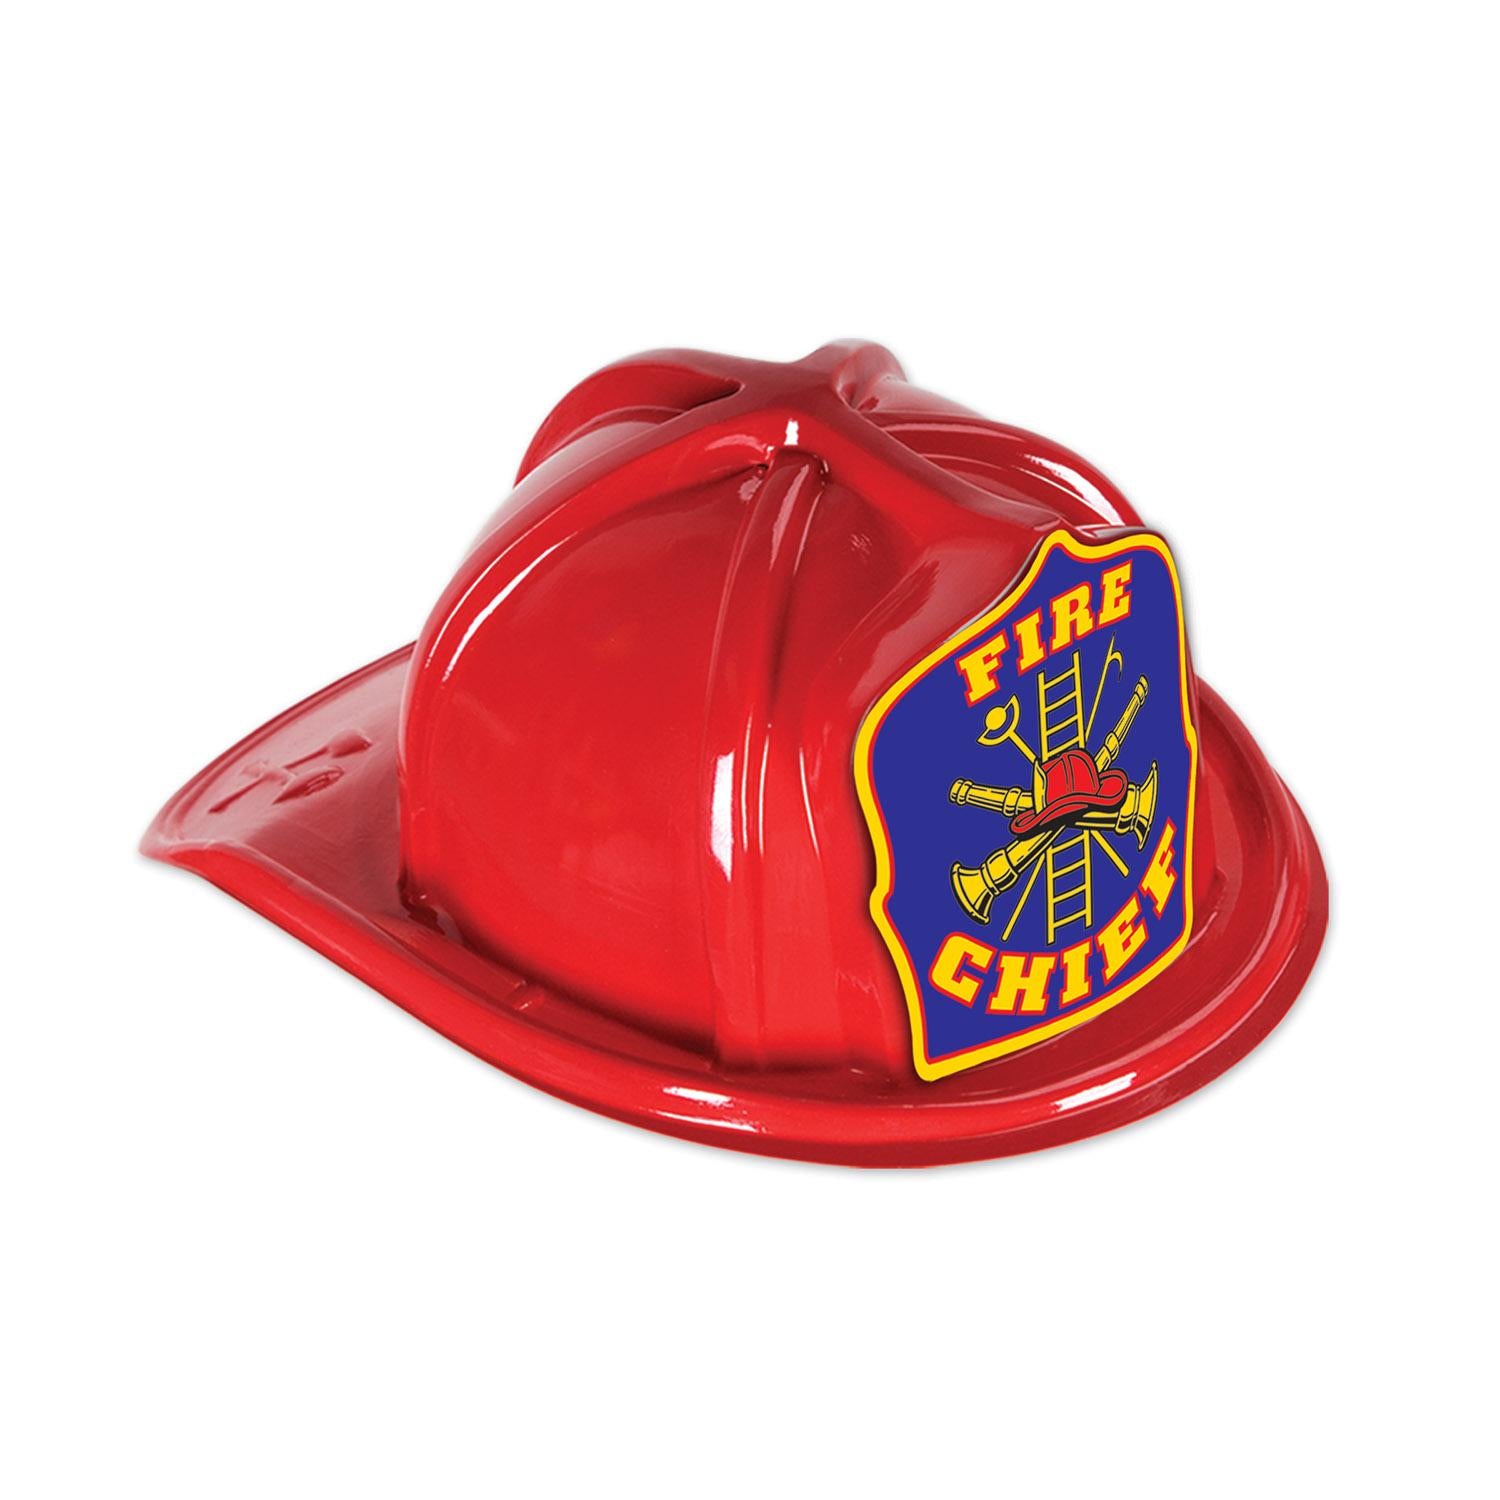 Beistle Red Plastic Fire Chief Hat with Blue Shield